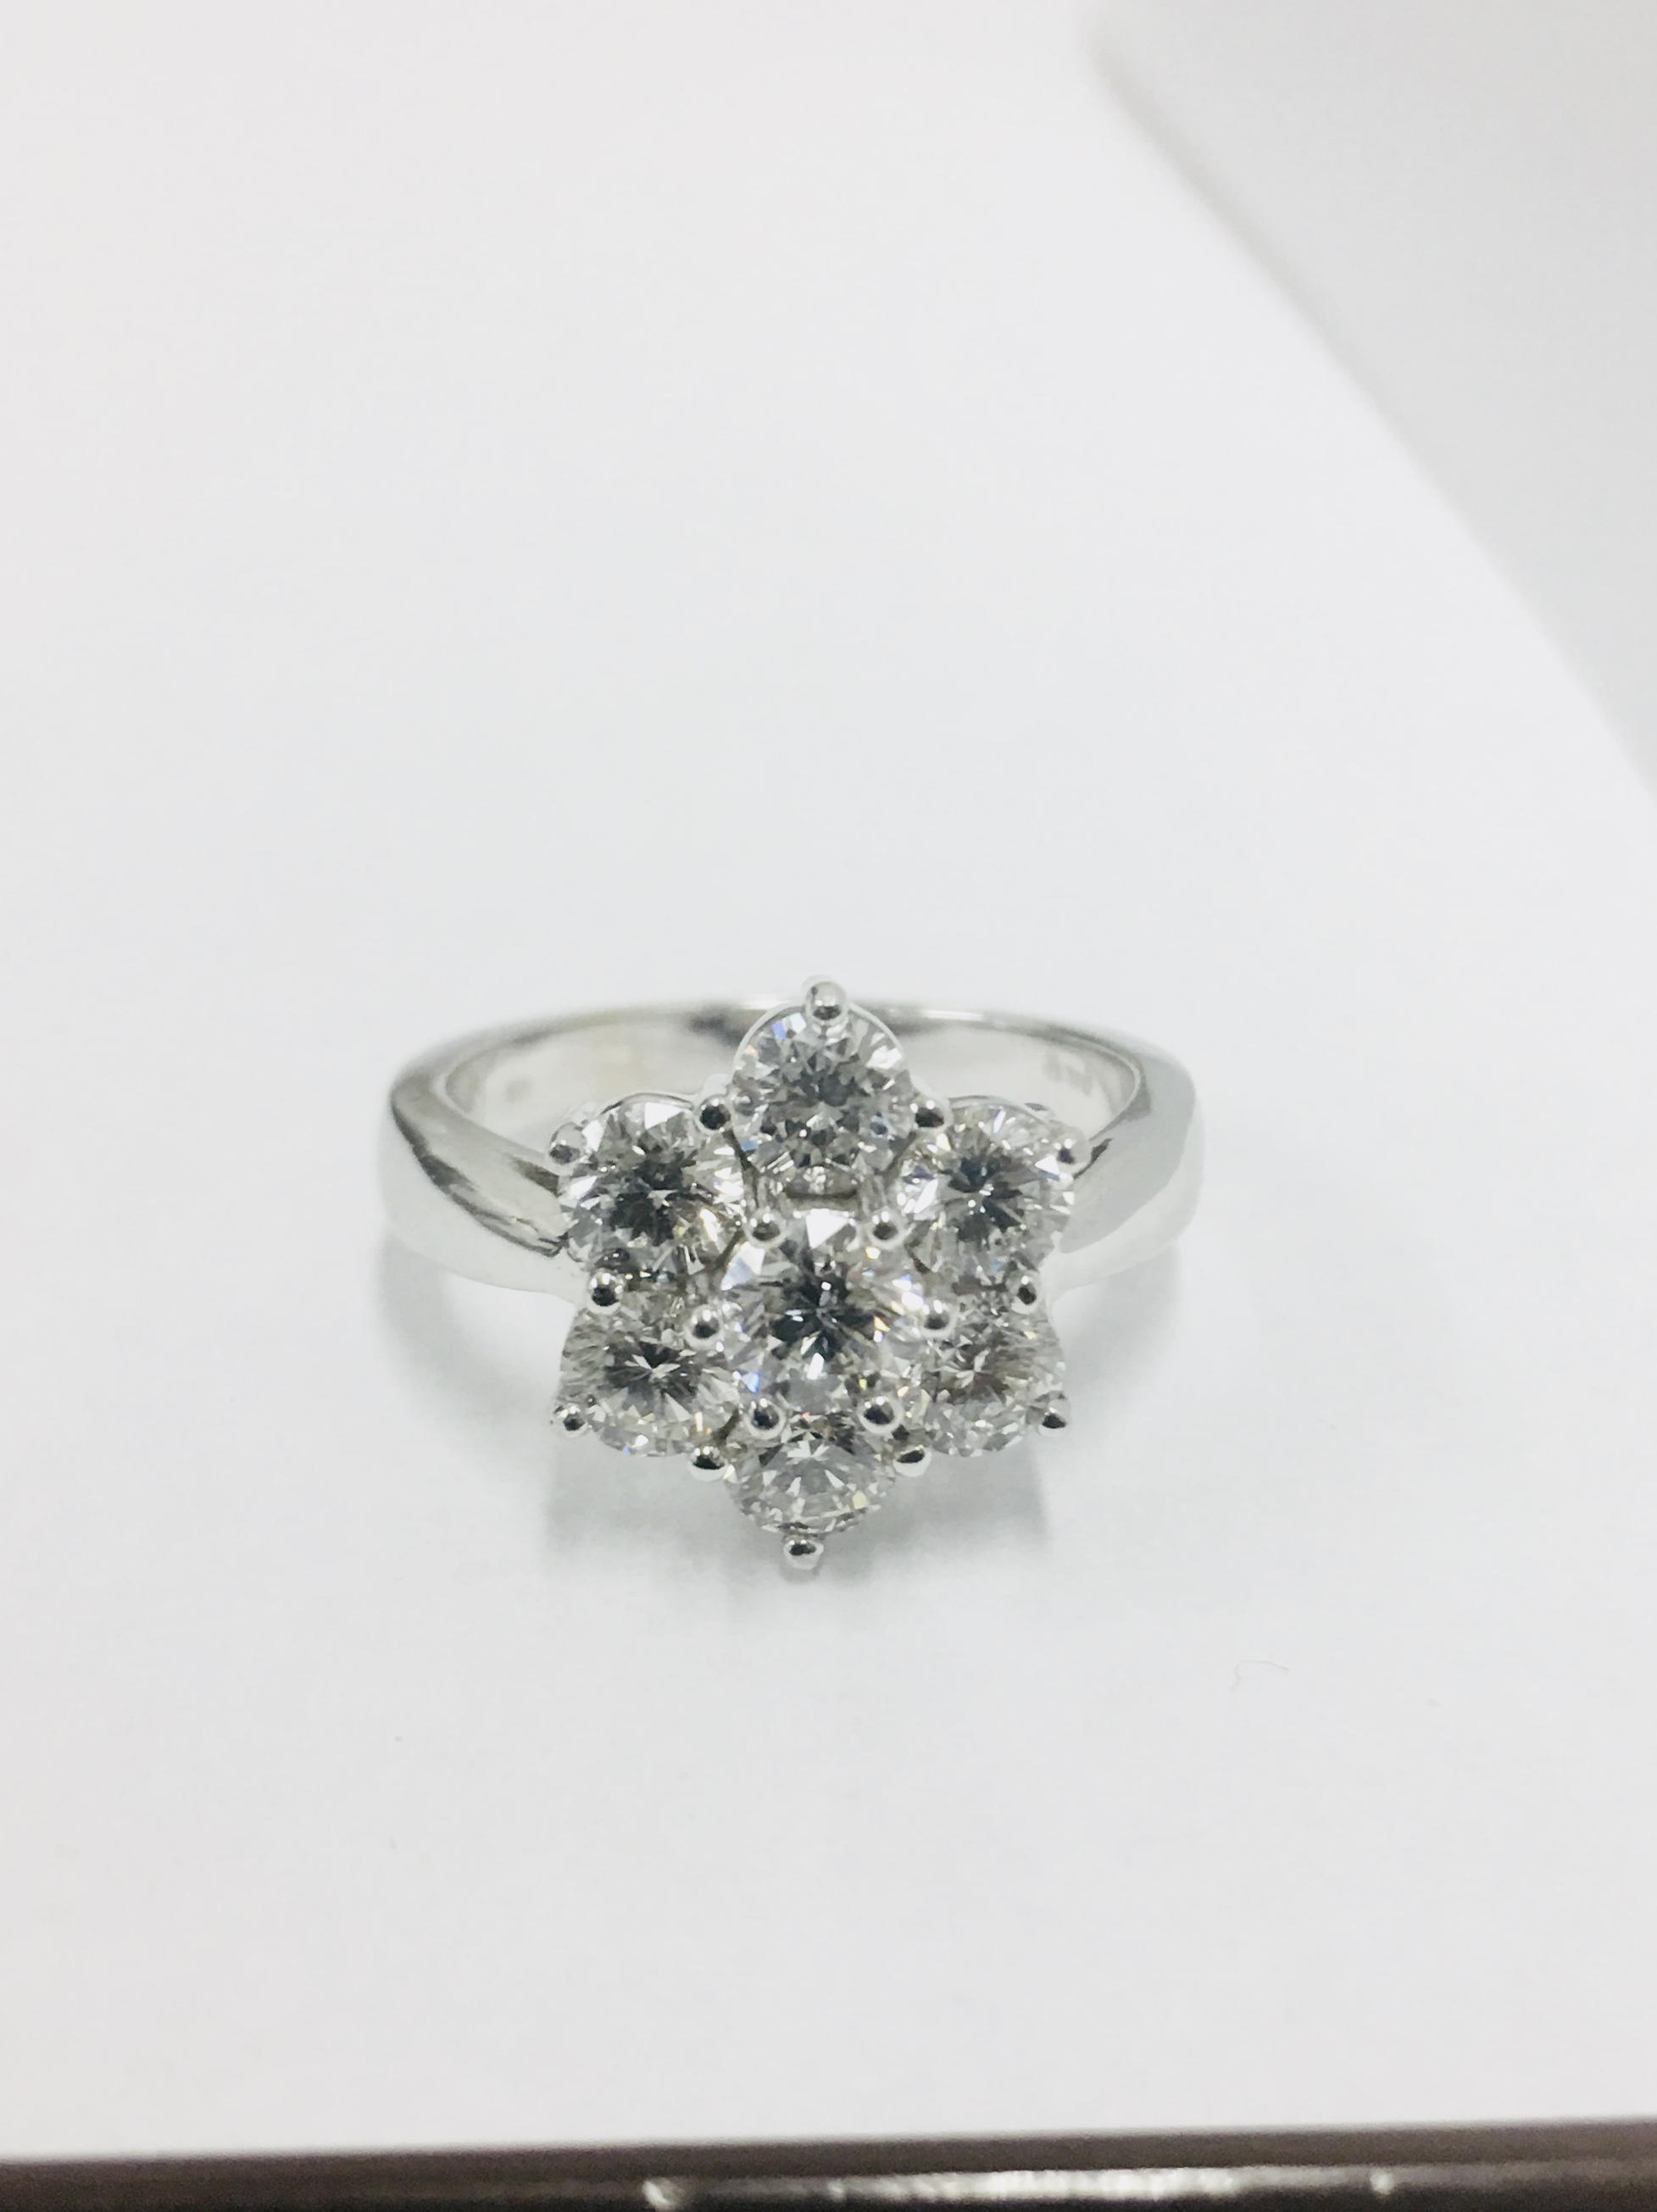 2.25Ct Diamond Cluster Style Dress Ring. - Image 2 of 4